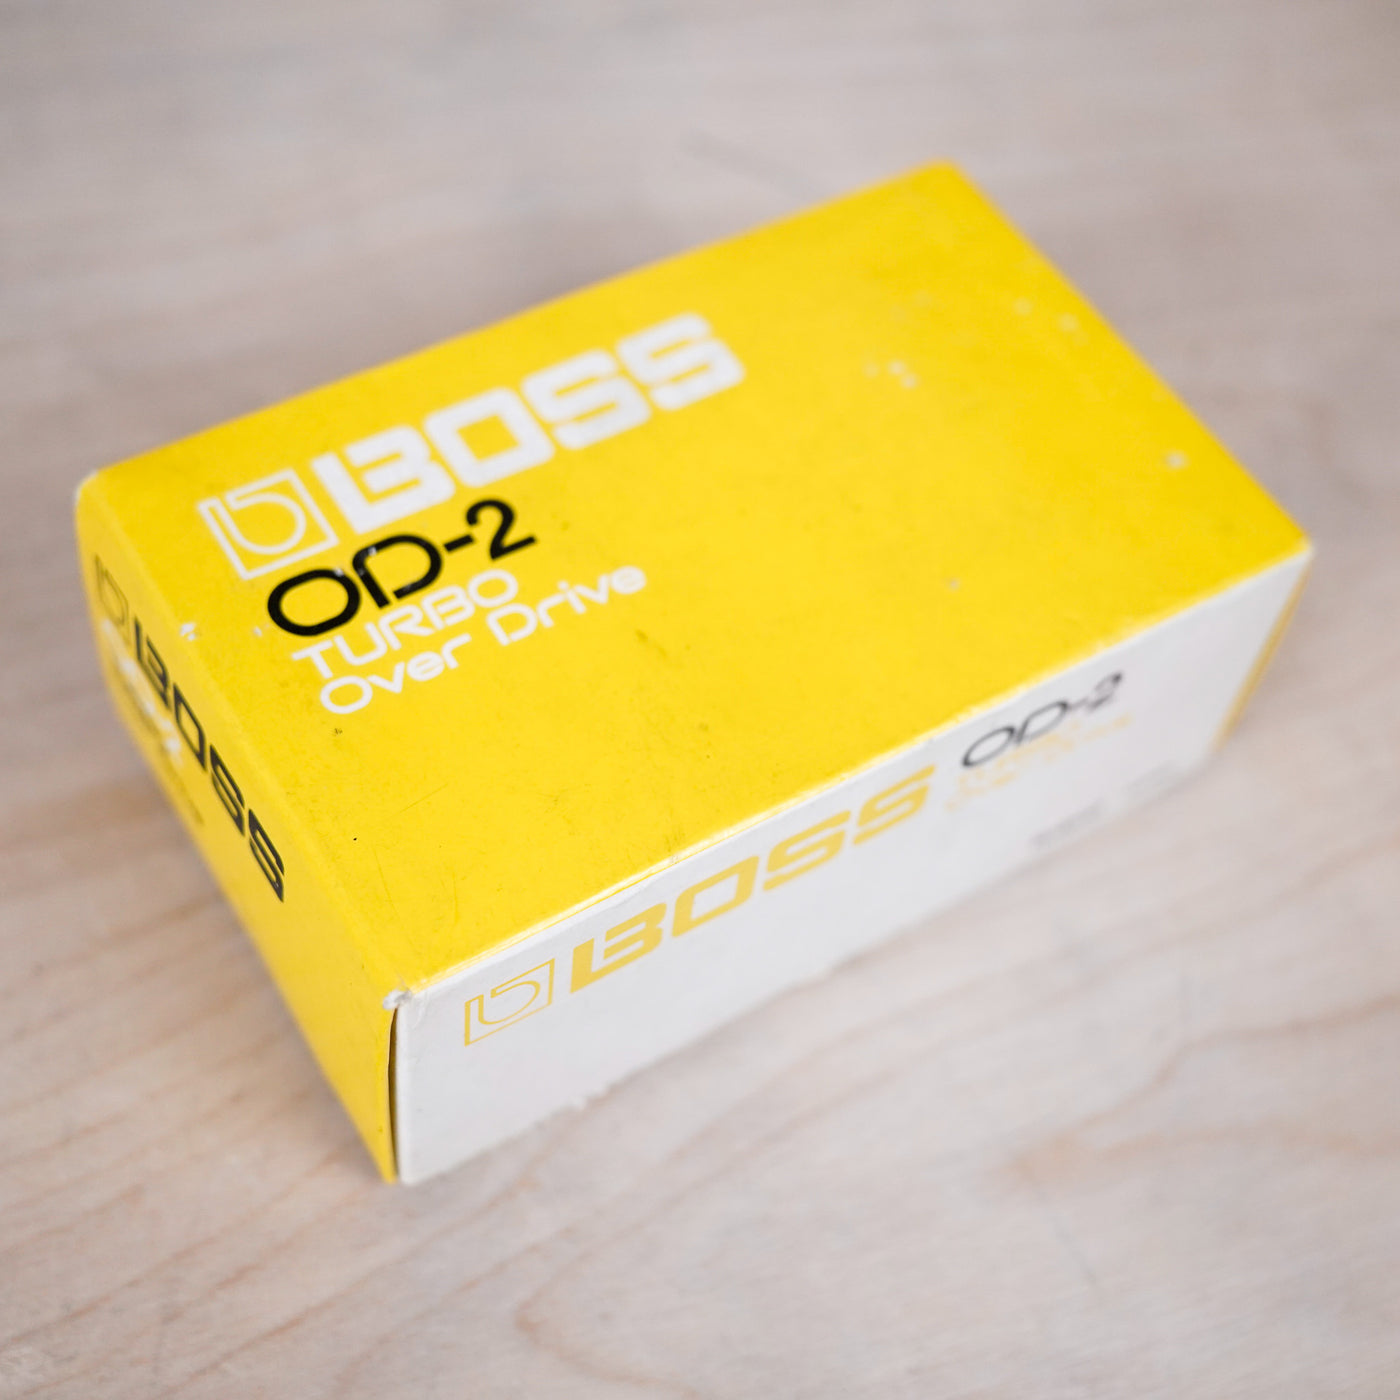 Boss OD-2 Turbo OverDrive (Black Label) 1987 Vintage Made in Japan Yellow in Box